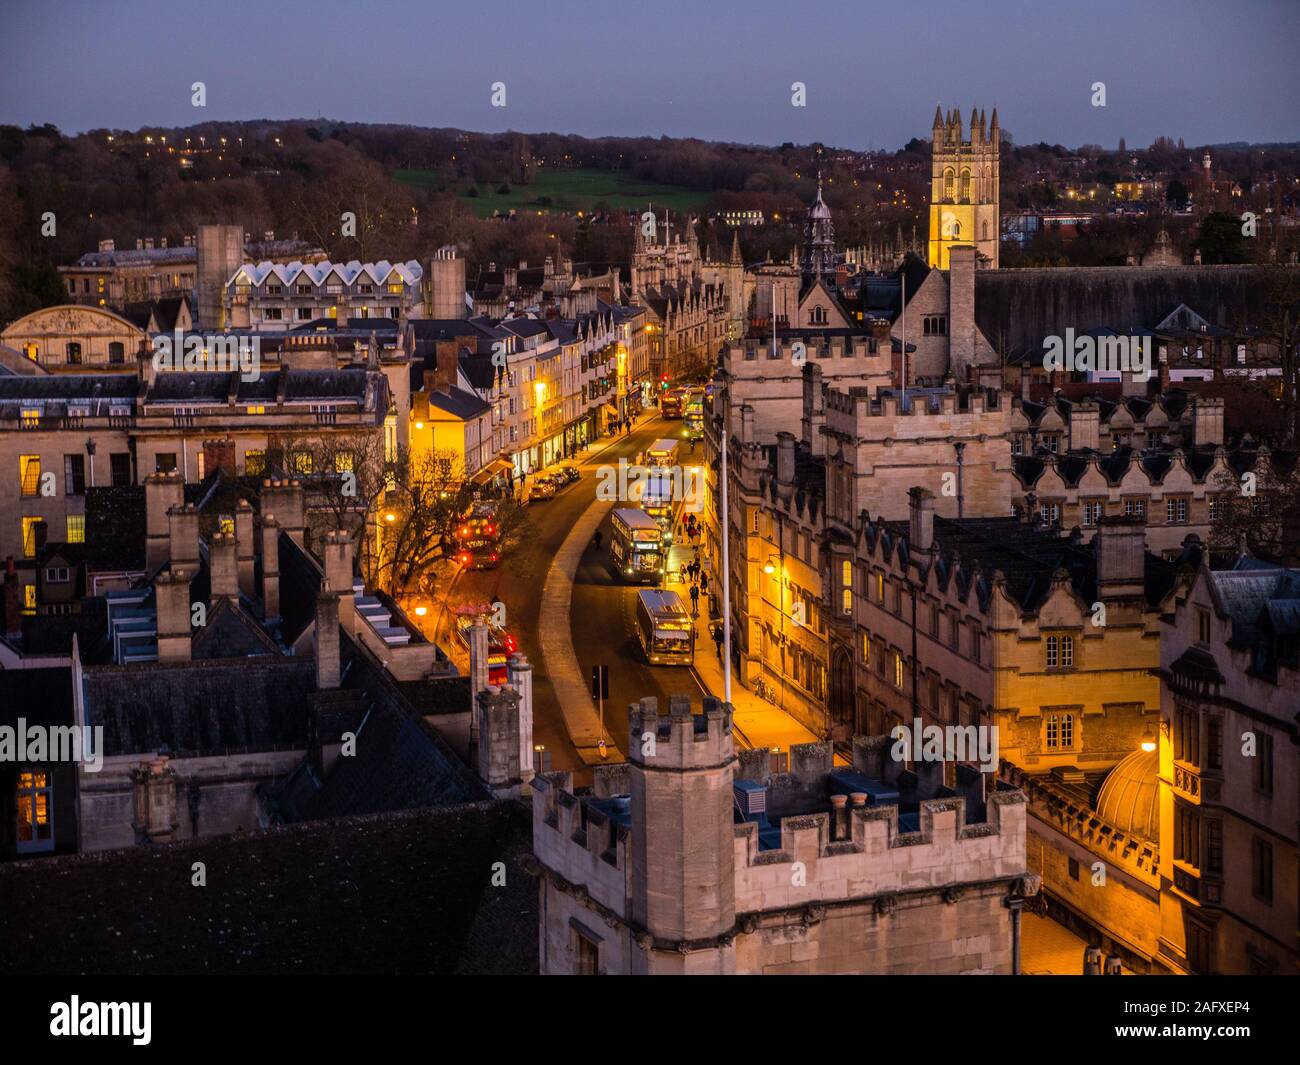 Magdalen Tower, Magdalen College, and The High Street, Night Time Landscape, Oxford University, Oxford, Oxfordshire, England, UK, GB. Stock Photo